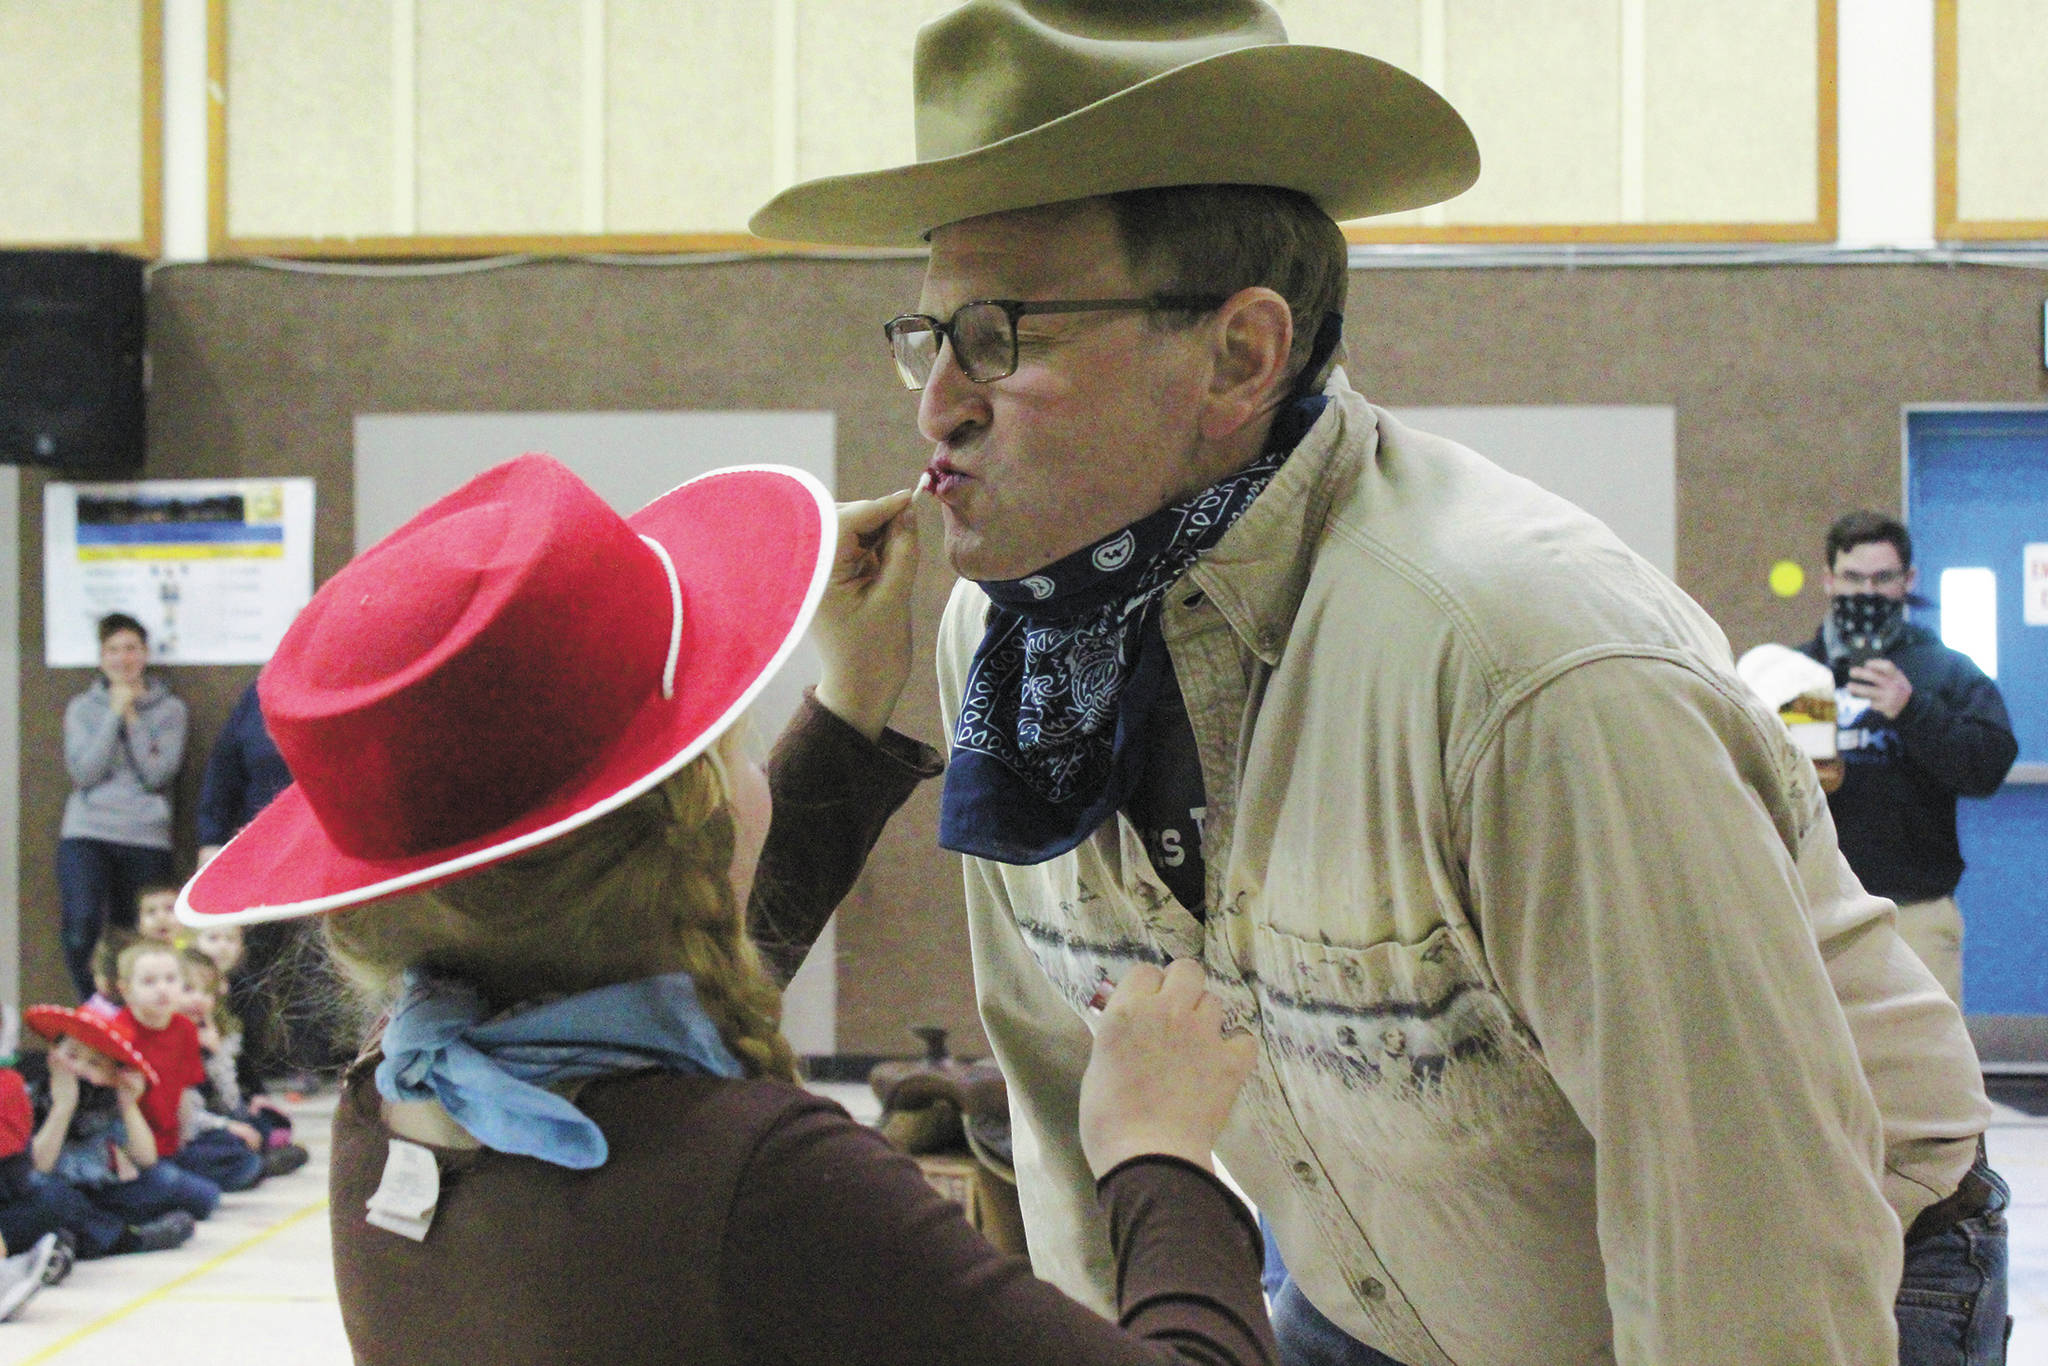 Ingrid Pederson, Principal Eric Pederson’s daughter, helps him put on lipstick before he kisses a pig at a wild west themed assembly to celebrate the end of Paul Banks Elementary School’s annual read-a-thon Thursday, March 5, 2020 at the school in Homer, Alaska. (Photo by Megan Pacer/Homer News)